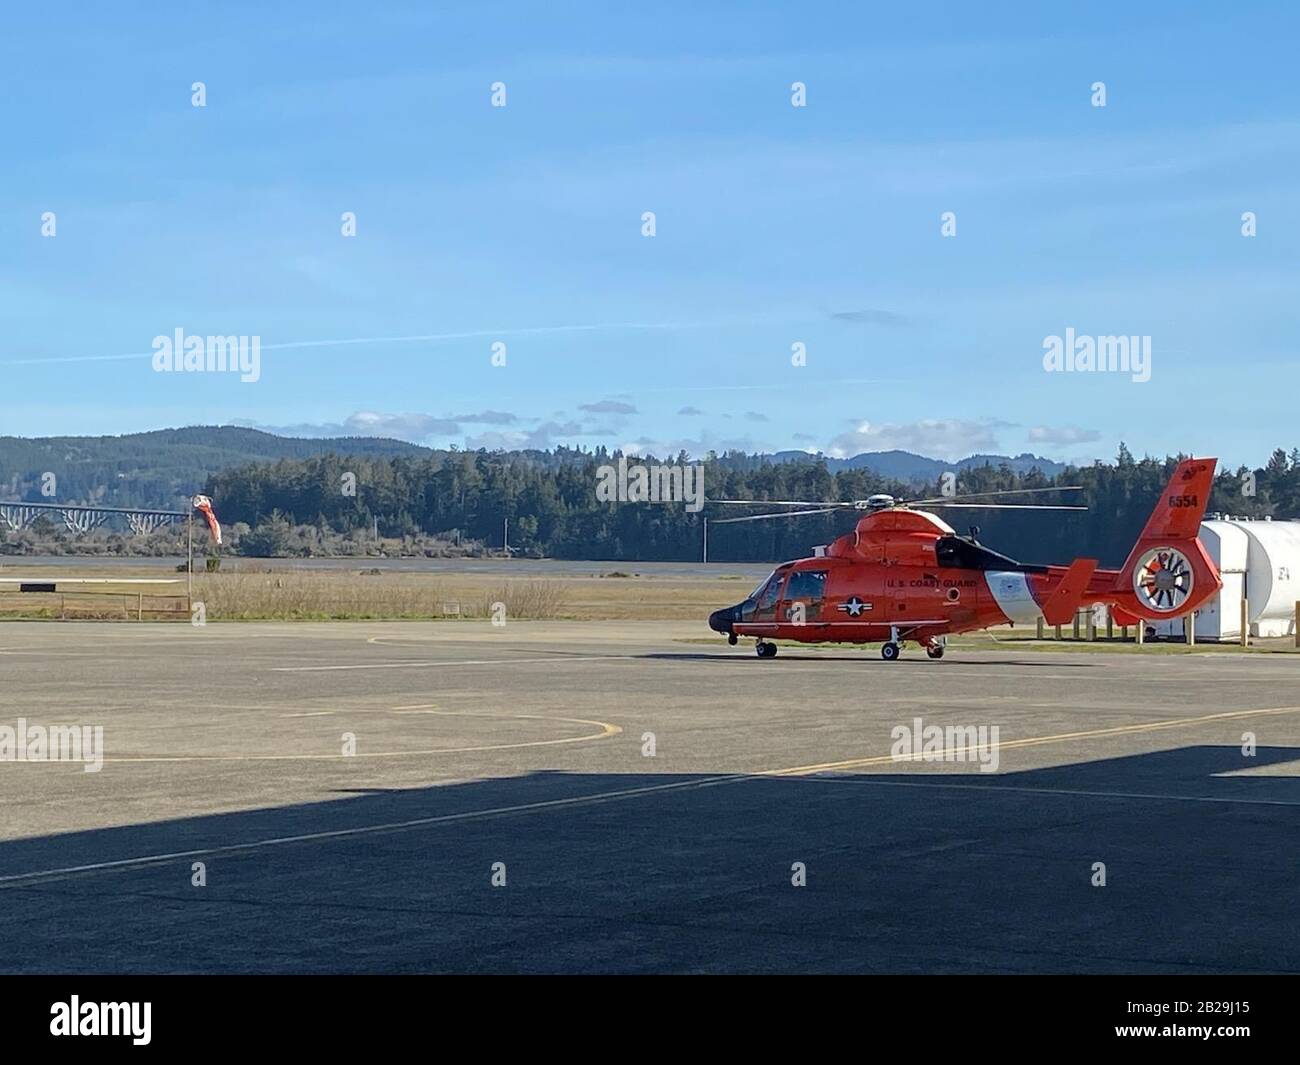 A Coast Guard MH-65 Dolphin helicopter sits on the tarmac at Sector North Bend, in North Bend, Oregon, Feb. 26, 2020. Sector North Bend operates five Dolphin helicopters to protect southern Oregon. (U.S. Coast Guard photo by Lt. Ryan Brown) Stock Photo